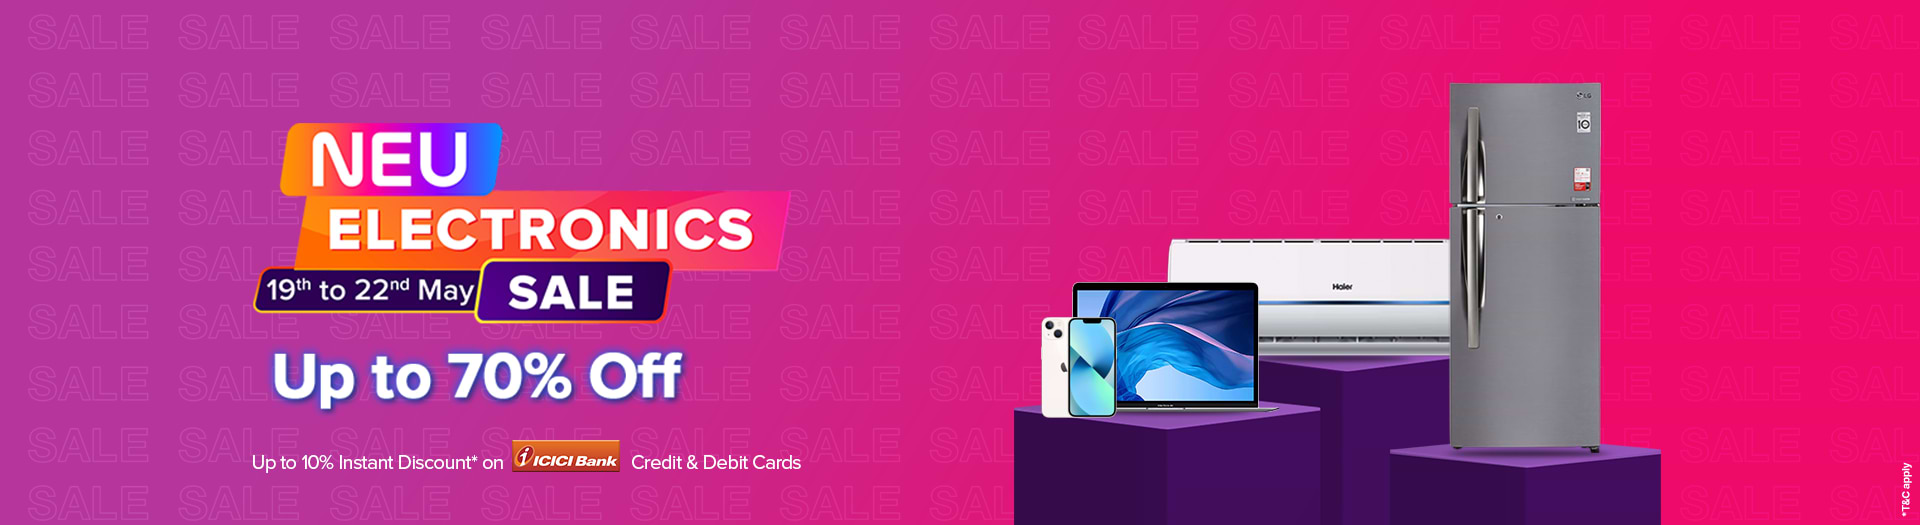 Neu Electronics Sale | 10% Off on ICICI Bank Offers | 19th – 22nd May